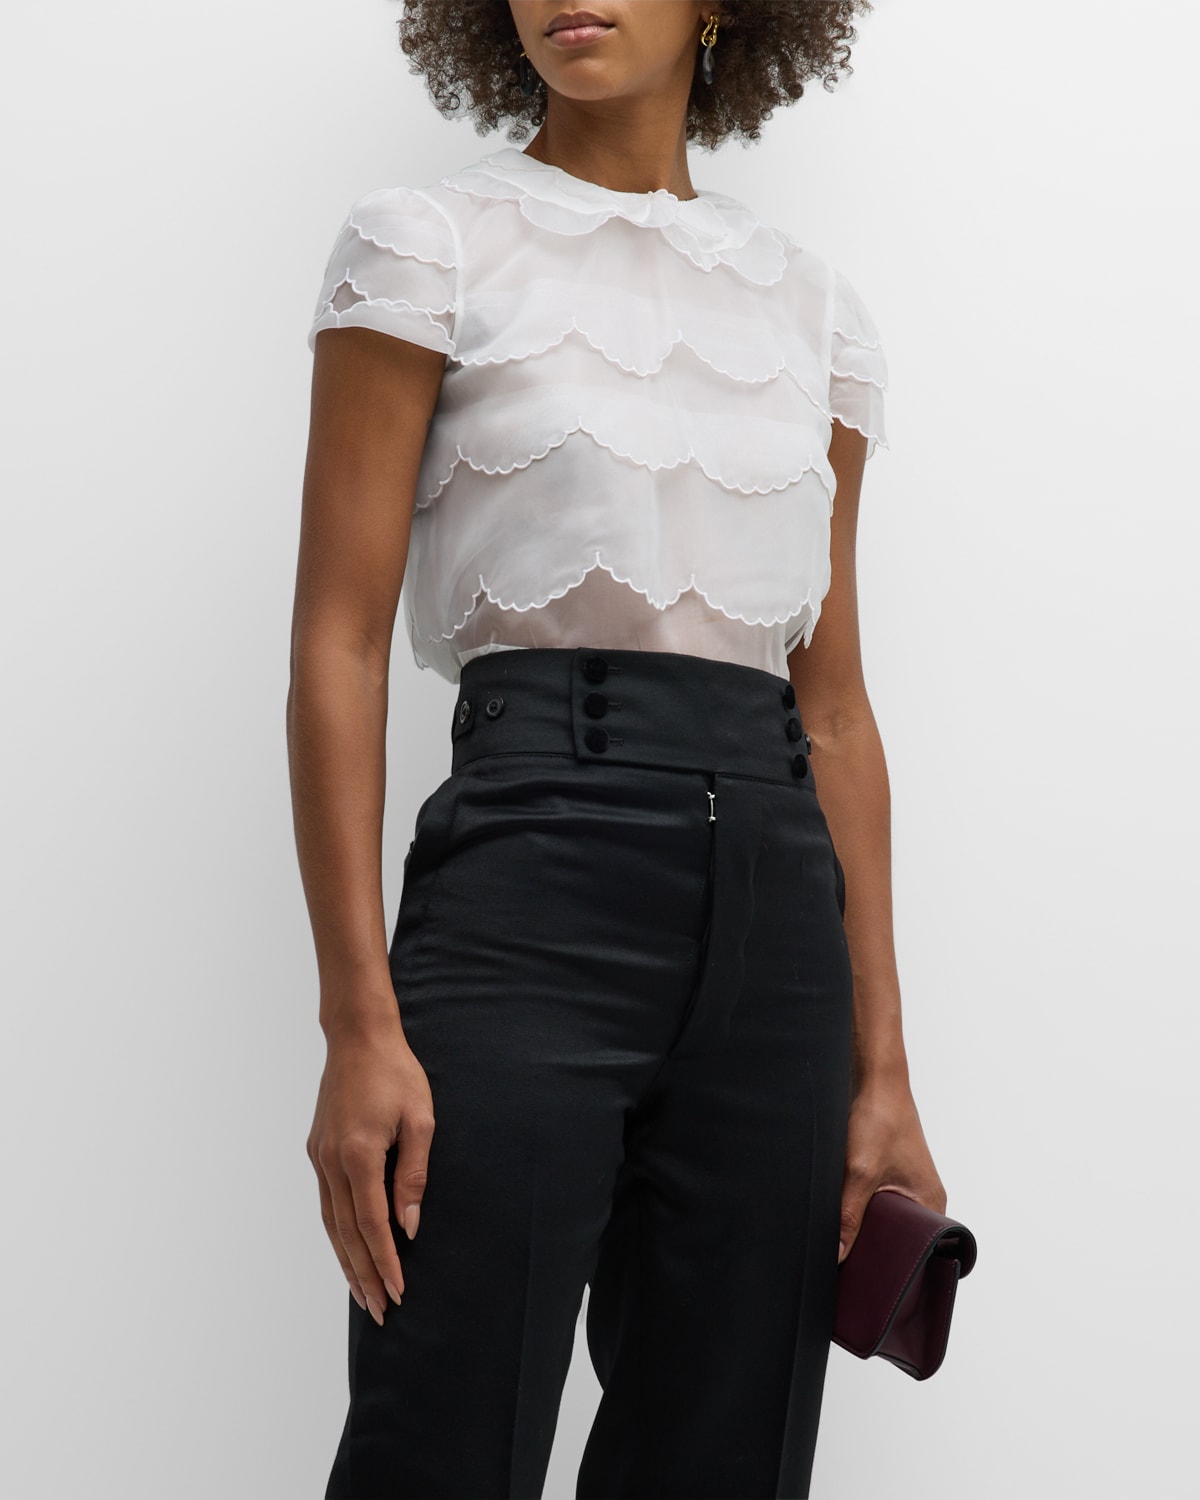 MAISON MARGIELA TIERED SCALLOPED SHORT-SLEEVED CROP TOP